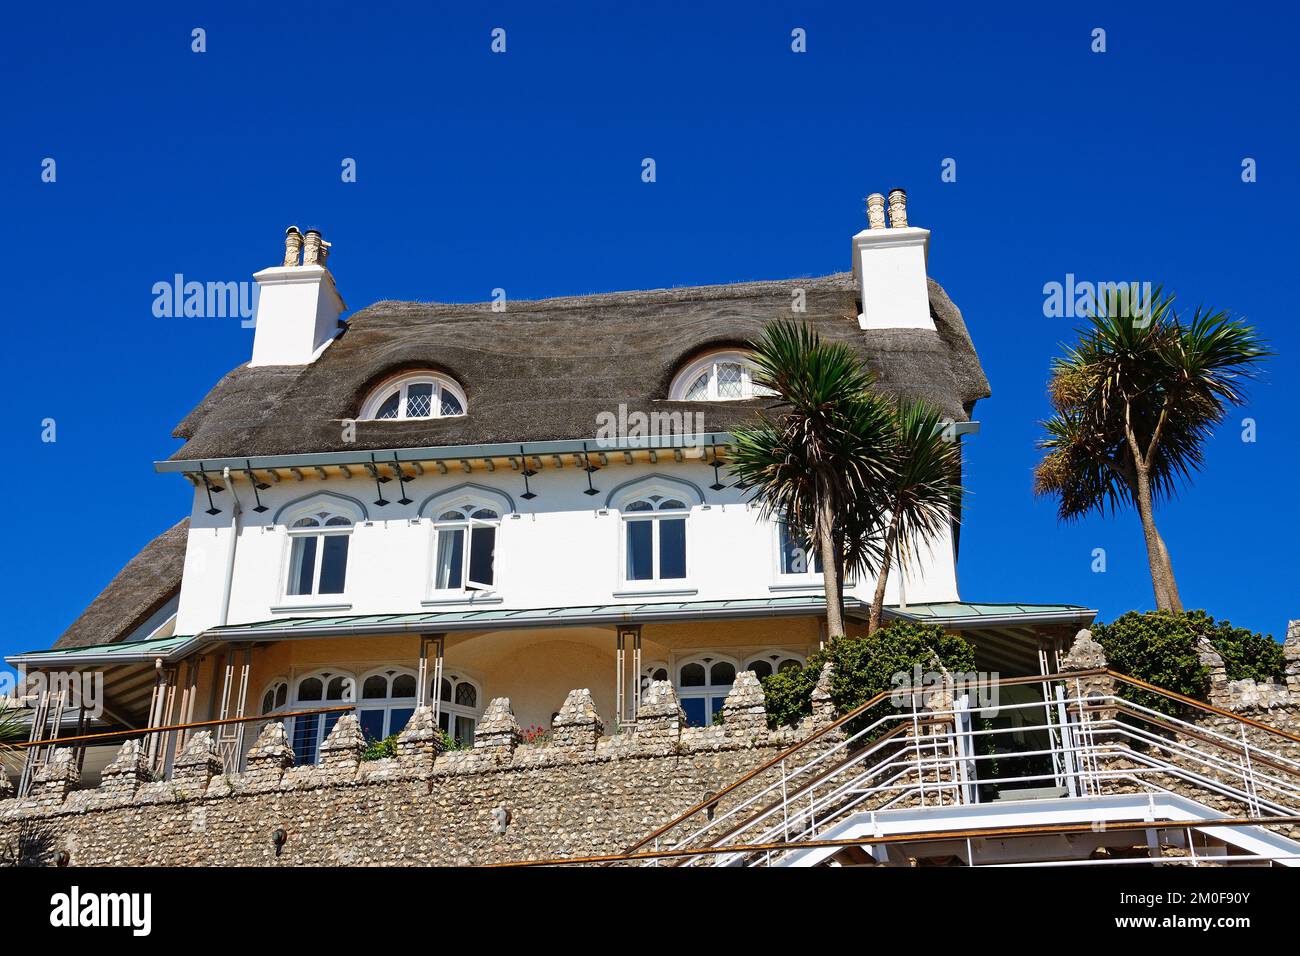 View of a traditional thatched house overlooking the beach with yuccas in the foreground, Sidmouth, Devon, UK, Europe Stock Photo